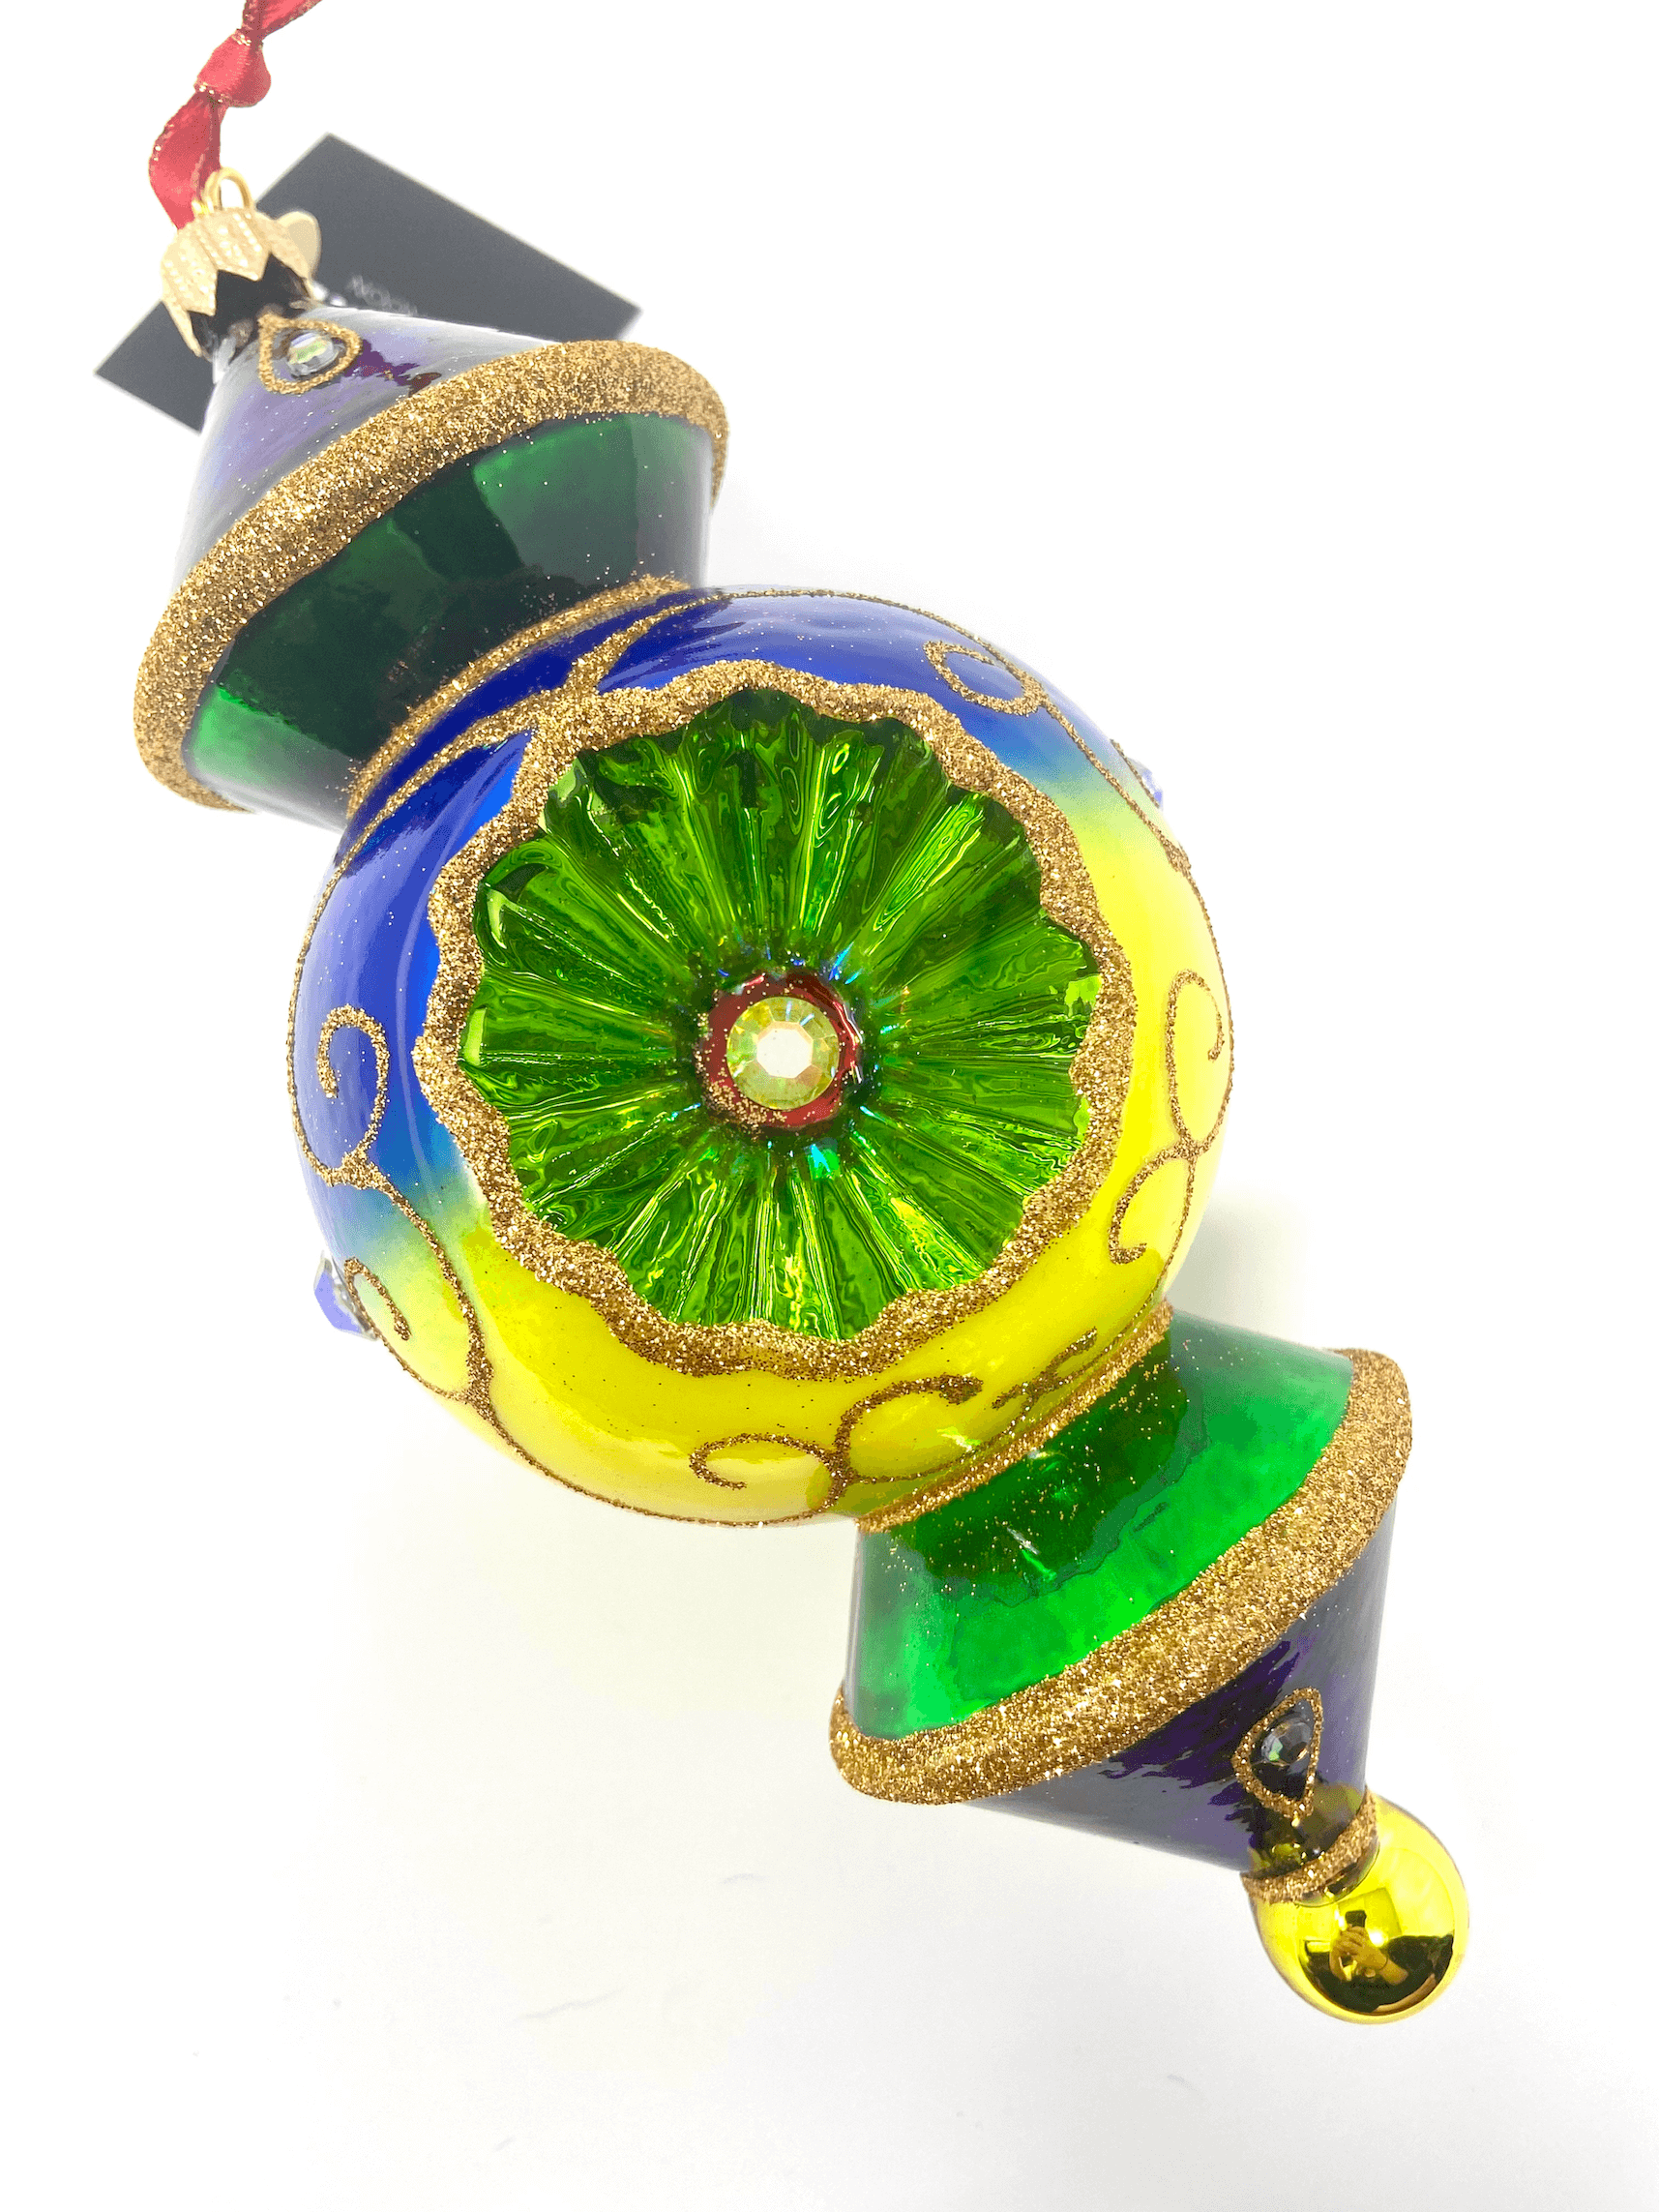 Rainbow triple barrel ornament with single reflector. Features gradient rainbow color and gold accents. Christmas polish glass ornaments.